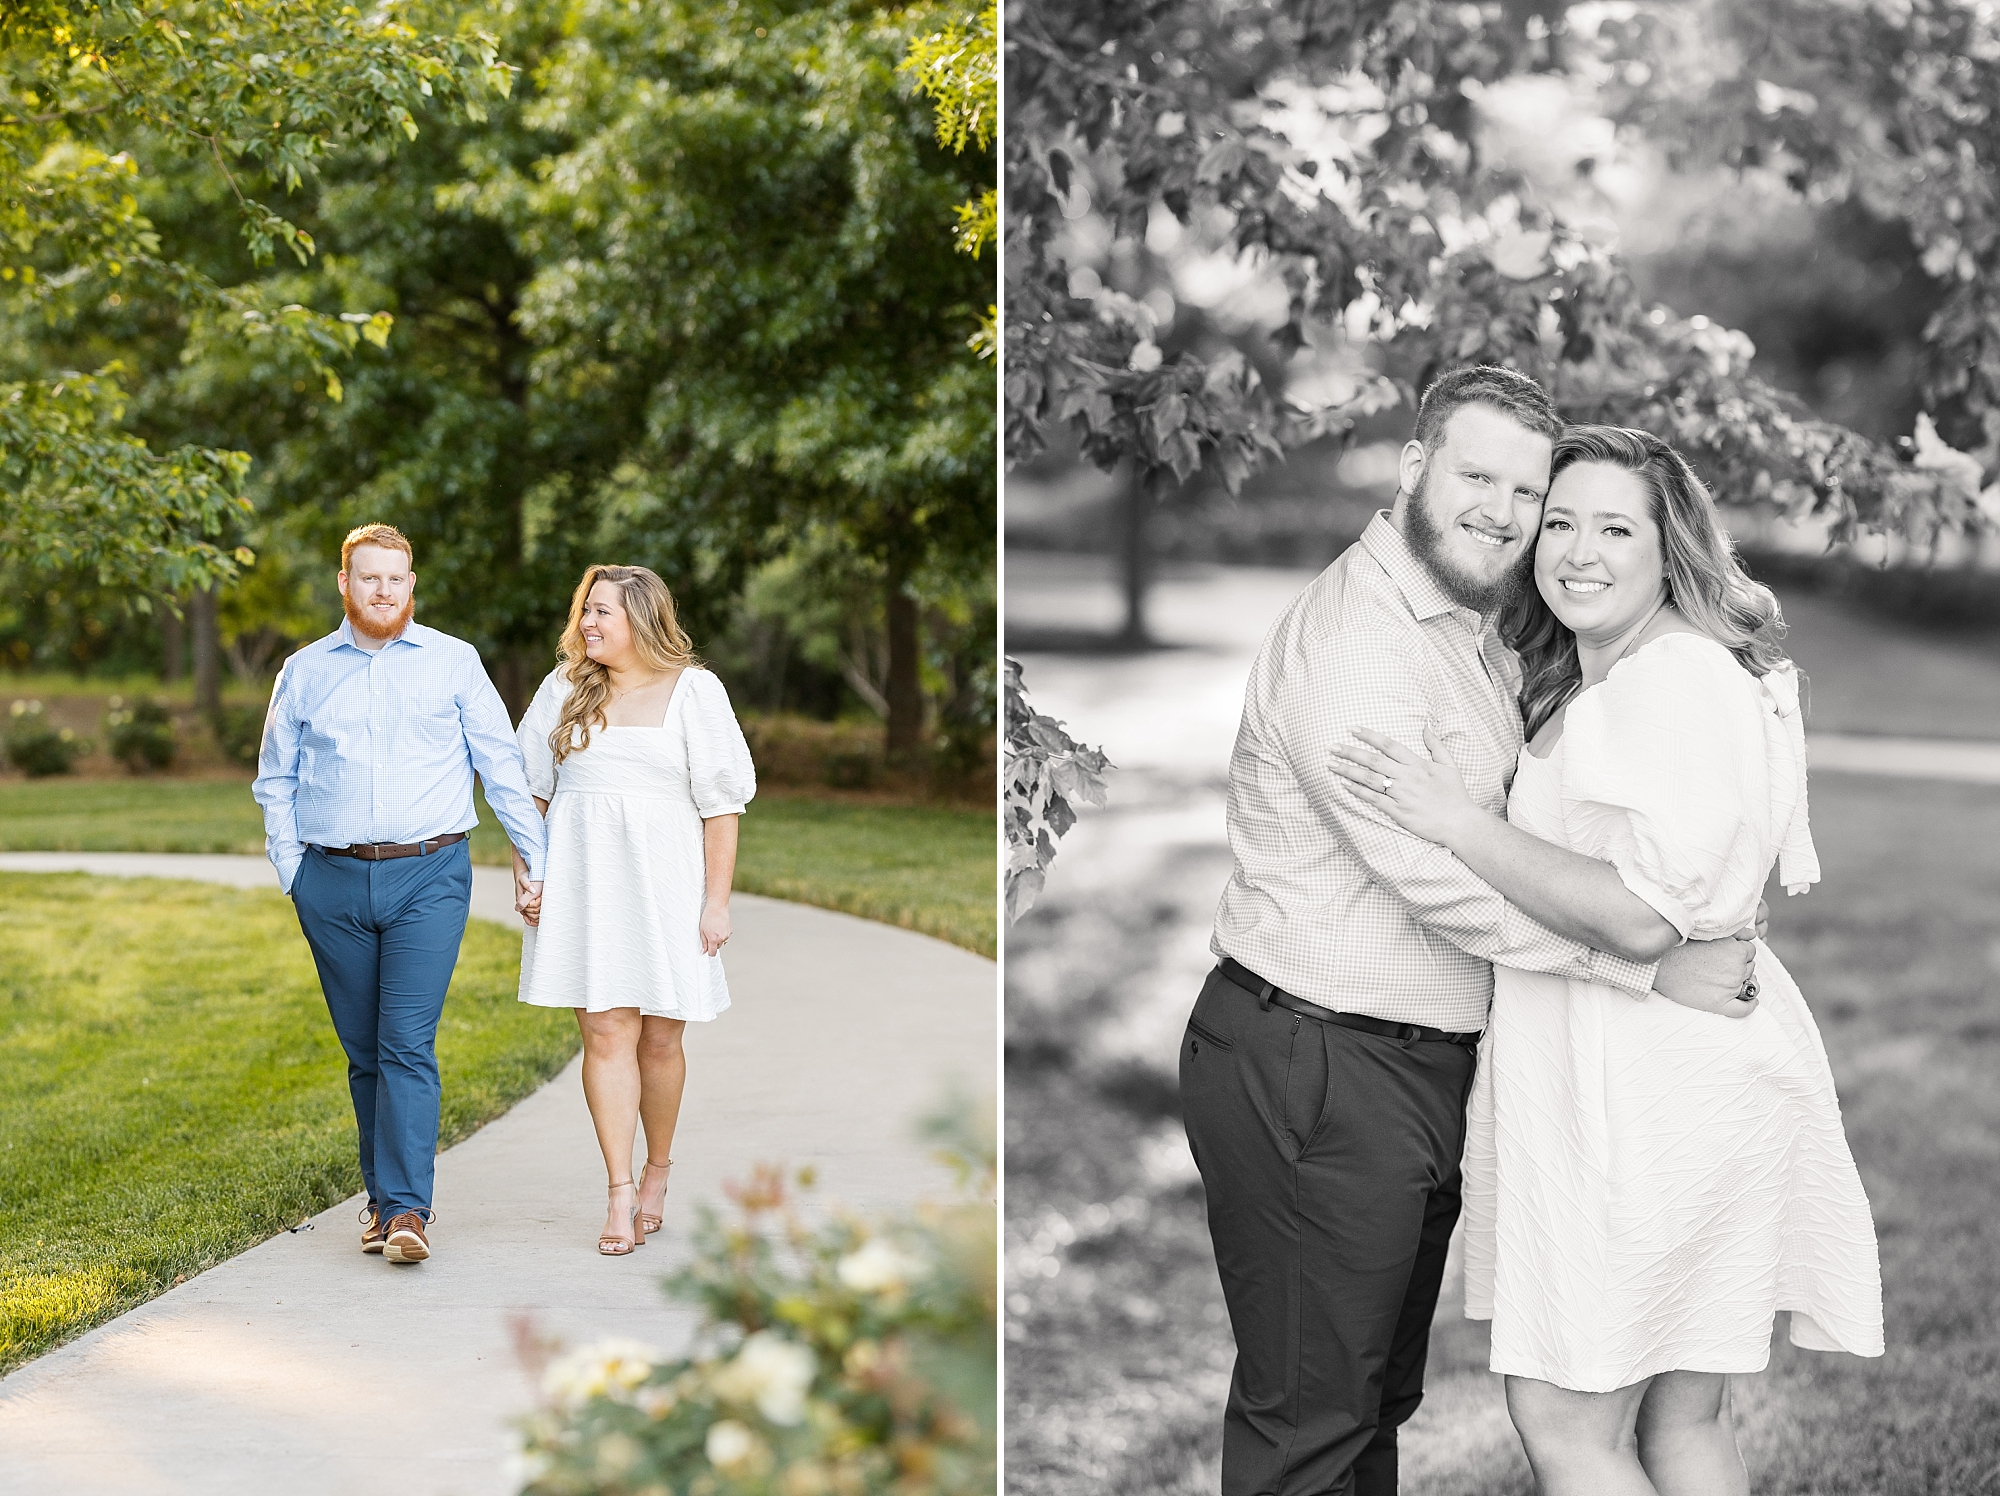 Park engagement photos in downtown Raleigh | Raleigh NC Engagement Photographer